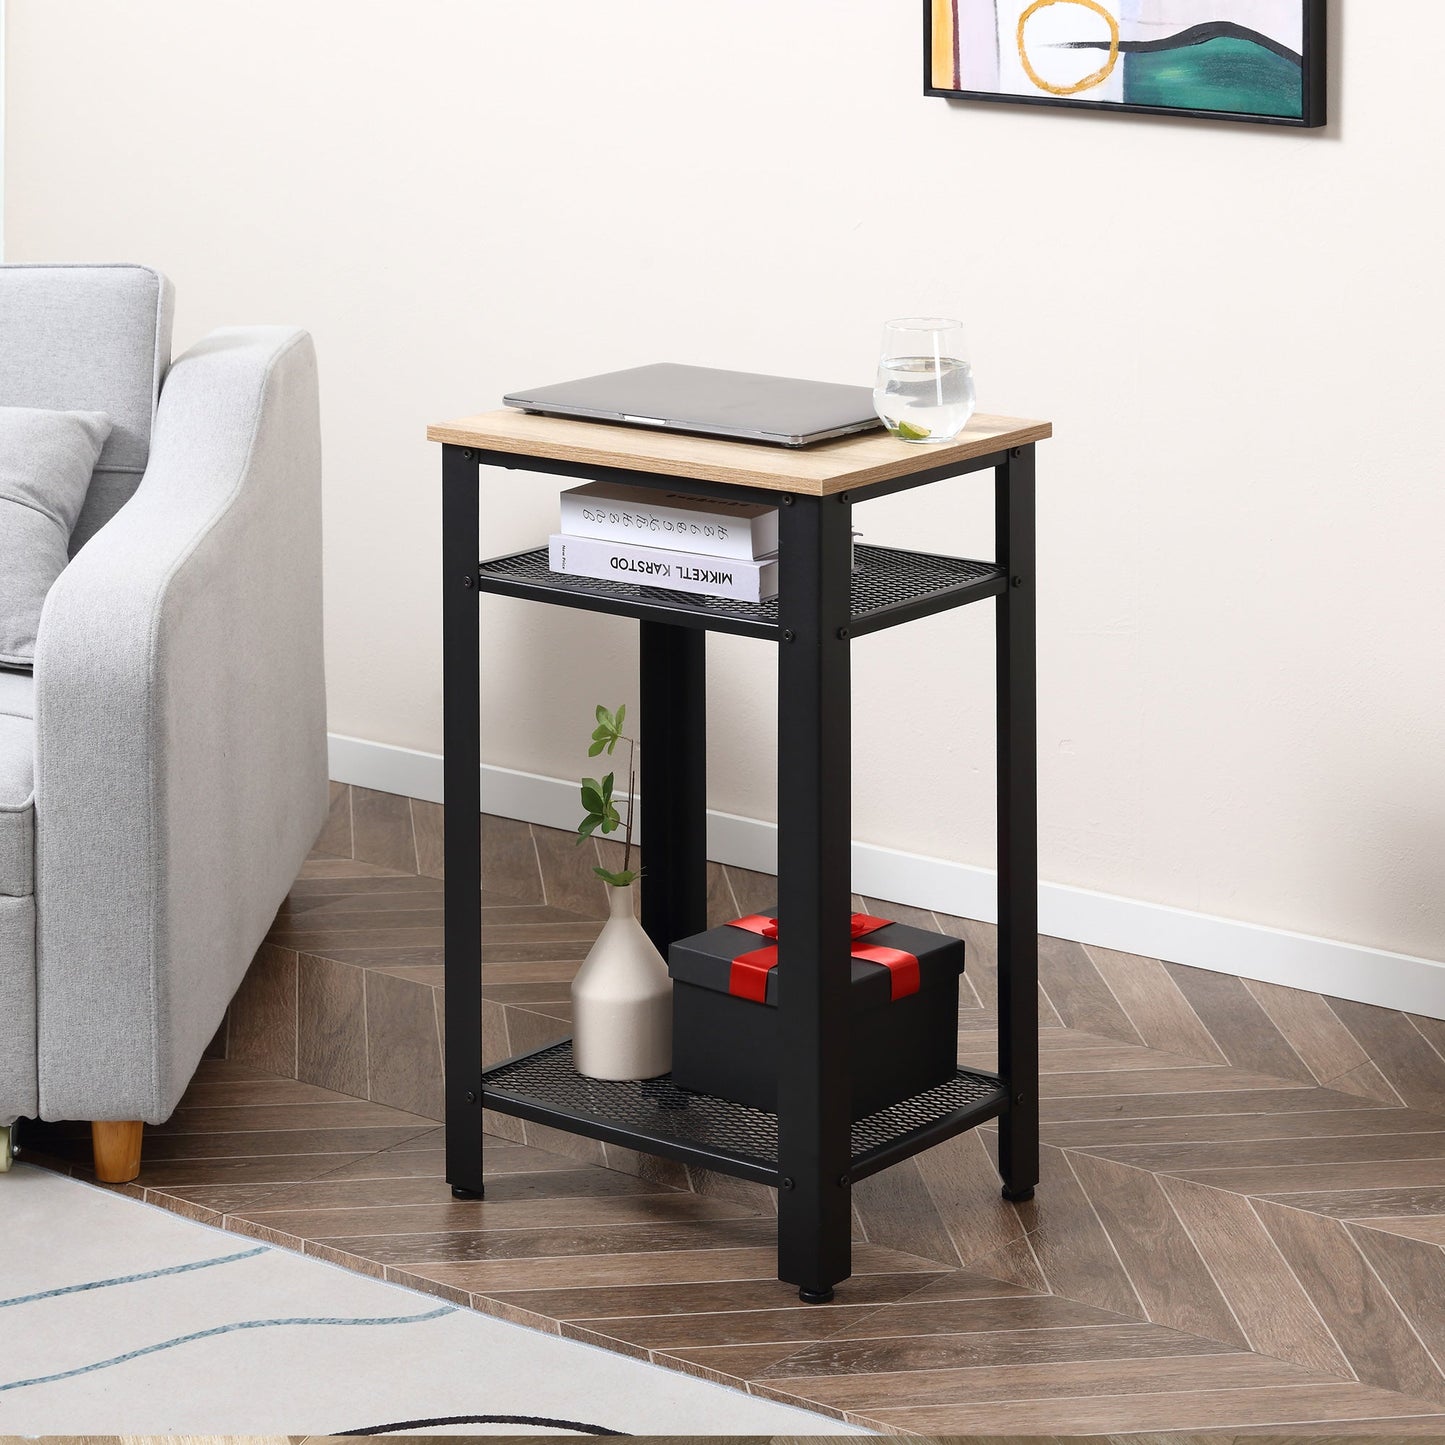 HOMCOM Industrial-Style Boxy Side Table 3 Layer 2 Shelves Storage Display w/ Metal Frame Stylish On-Trend Bedside End Table Nightstand